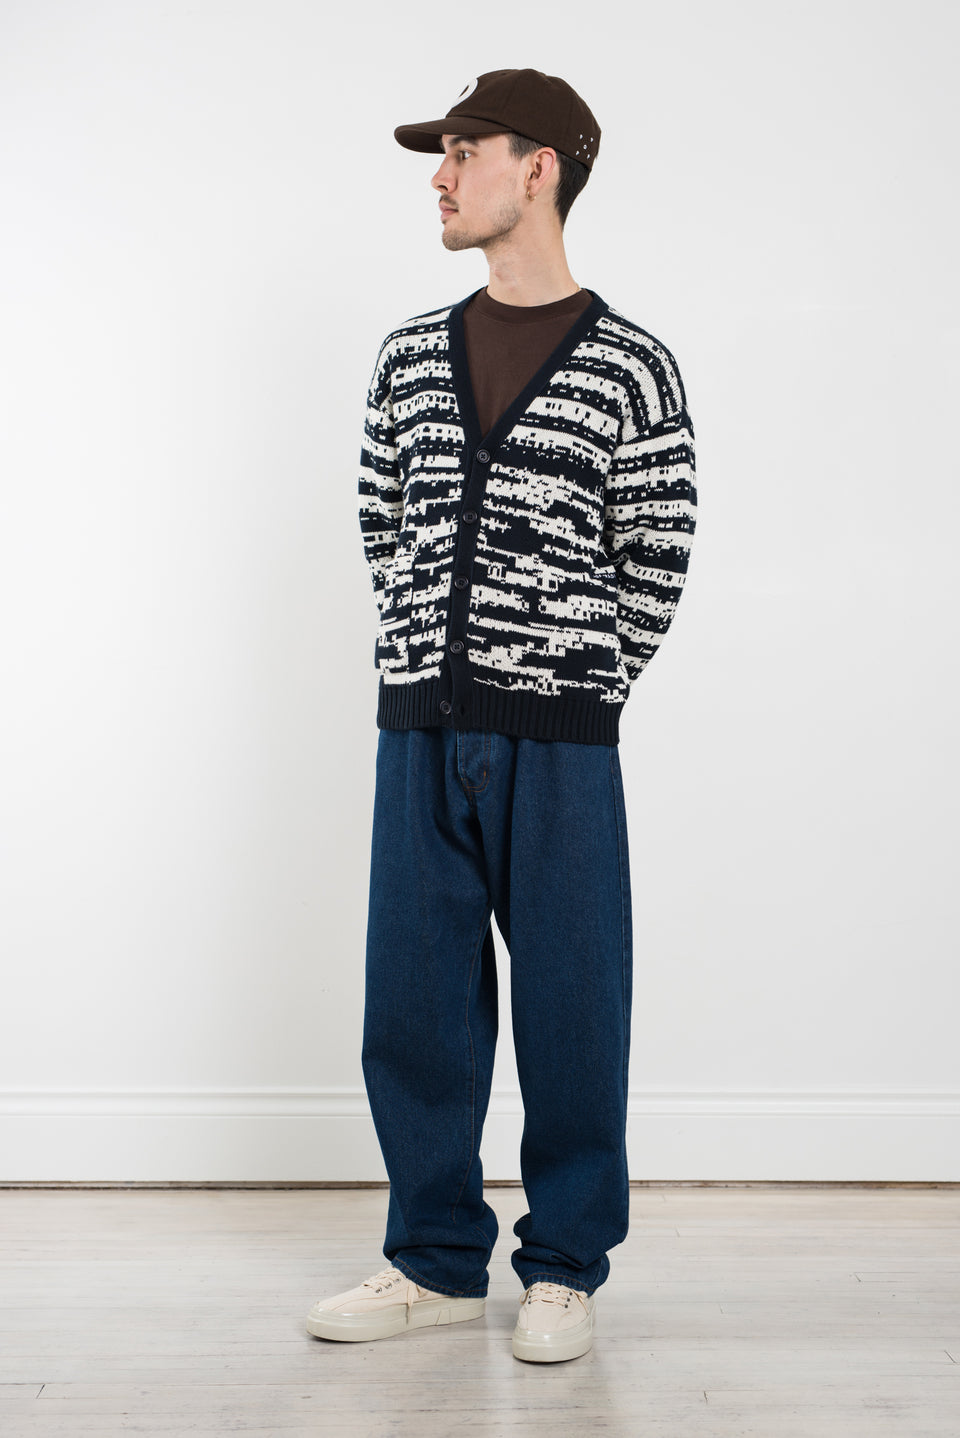 Pop Trading Company SS22 Gilles de Brock Knitted Cardigan Navy / Off-White Calculus Victoria BC Canada